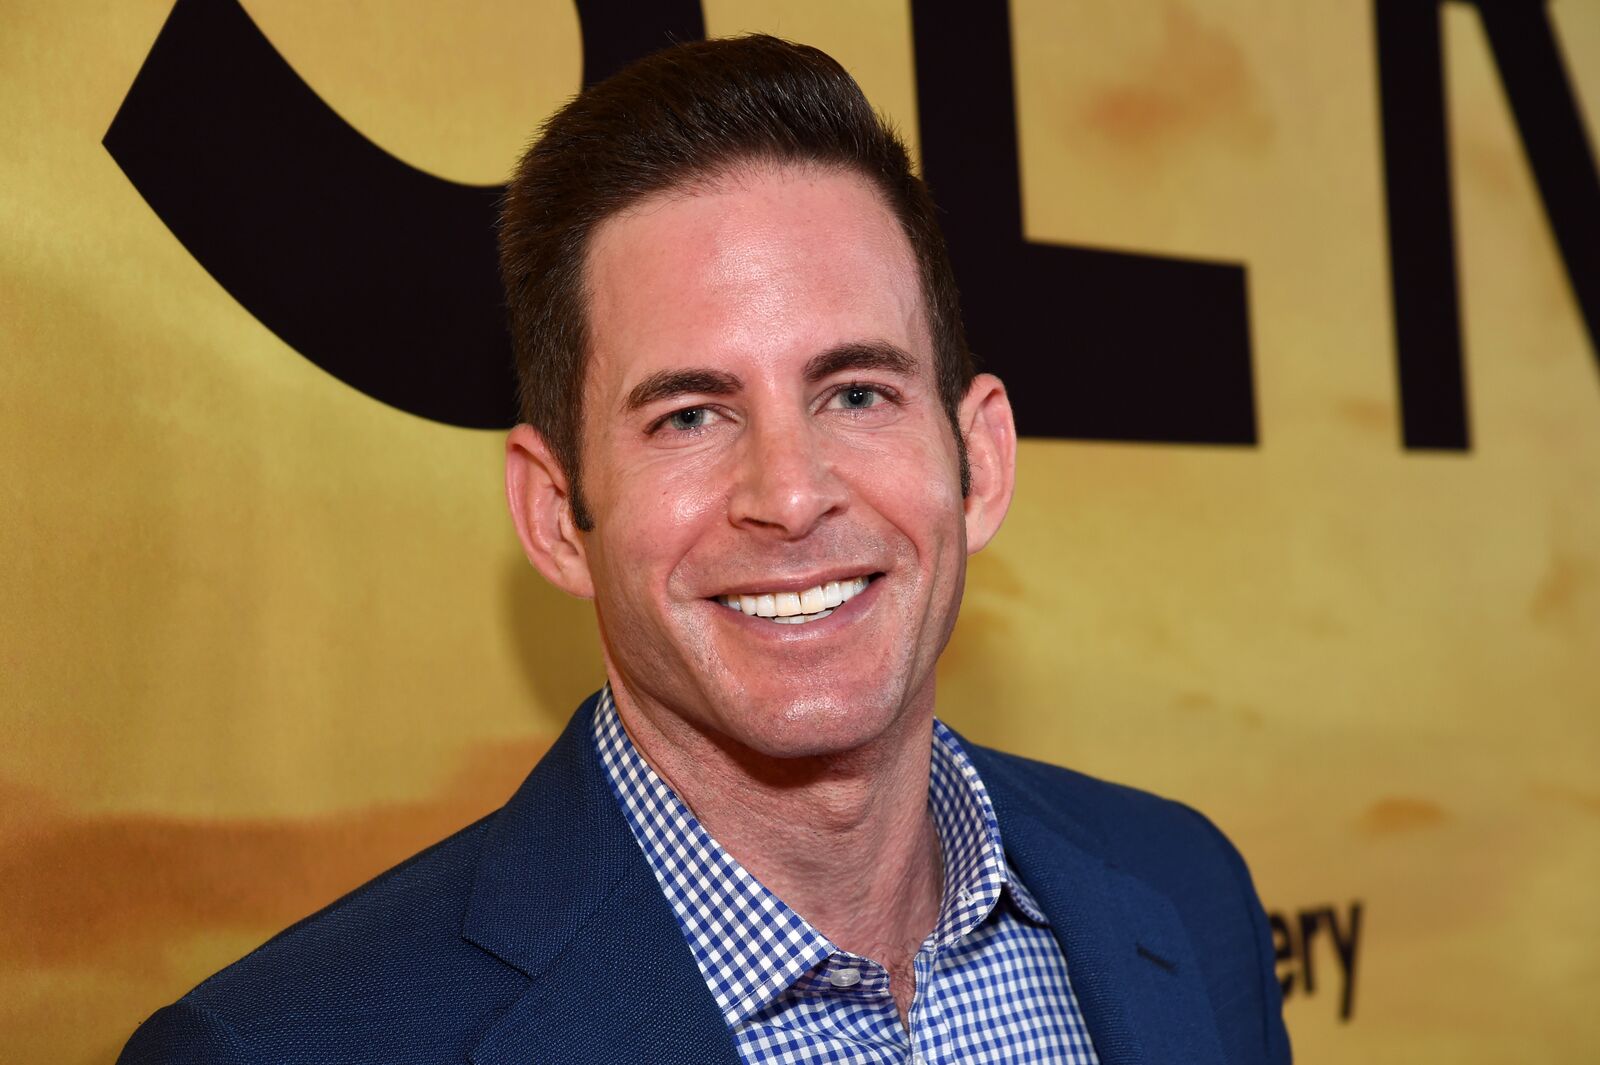 Tarek El Moussa attends Discovery's "Serengeti" premiere at Wallis Annenberg Center for the Performing Arts on July 23, 2019 in Beverly Hills, California | Photo: Getty Images